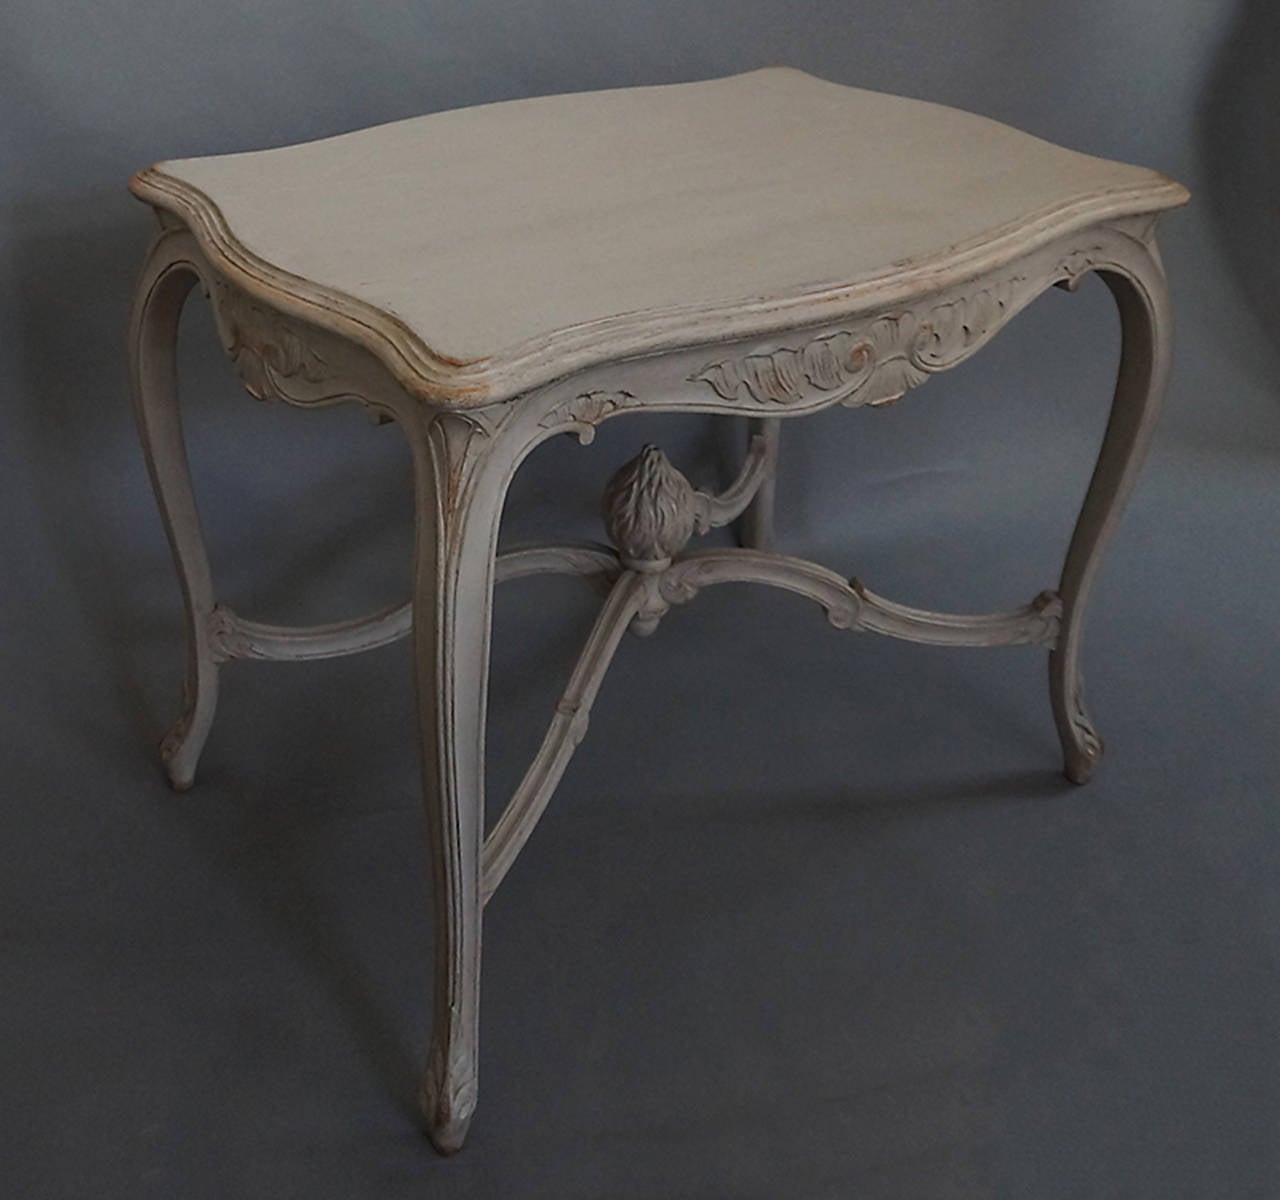 Rococo style center table, Sweden circa 1870, with carved aprons, cabriole legs with foliate detail on the toe and a beautifully carved flame finial where the stretchers meet.